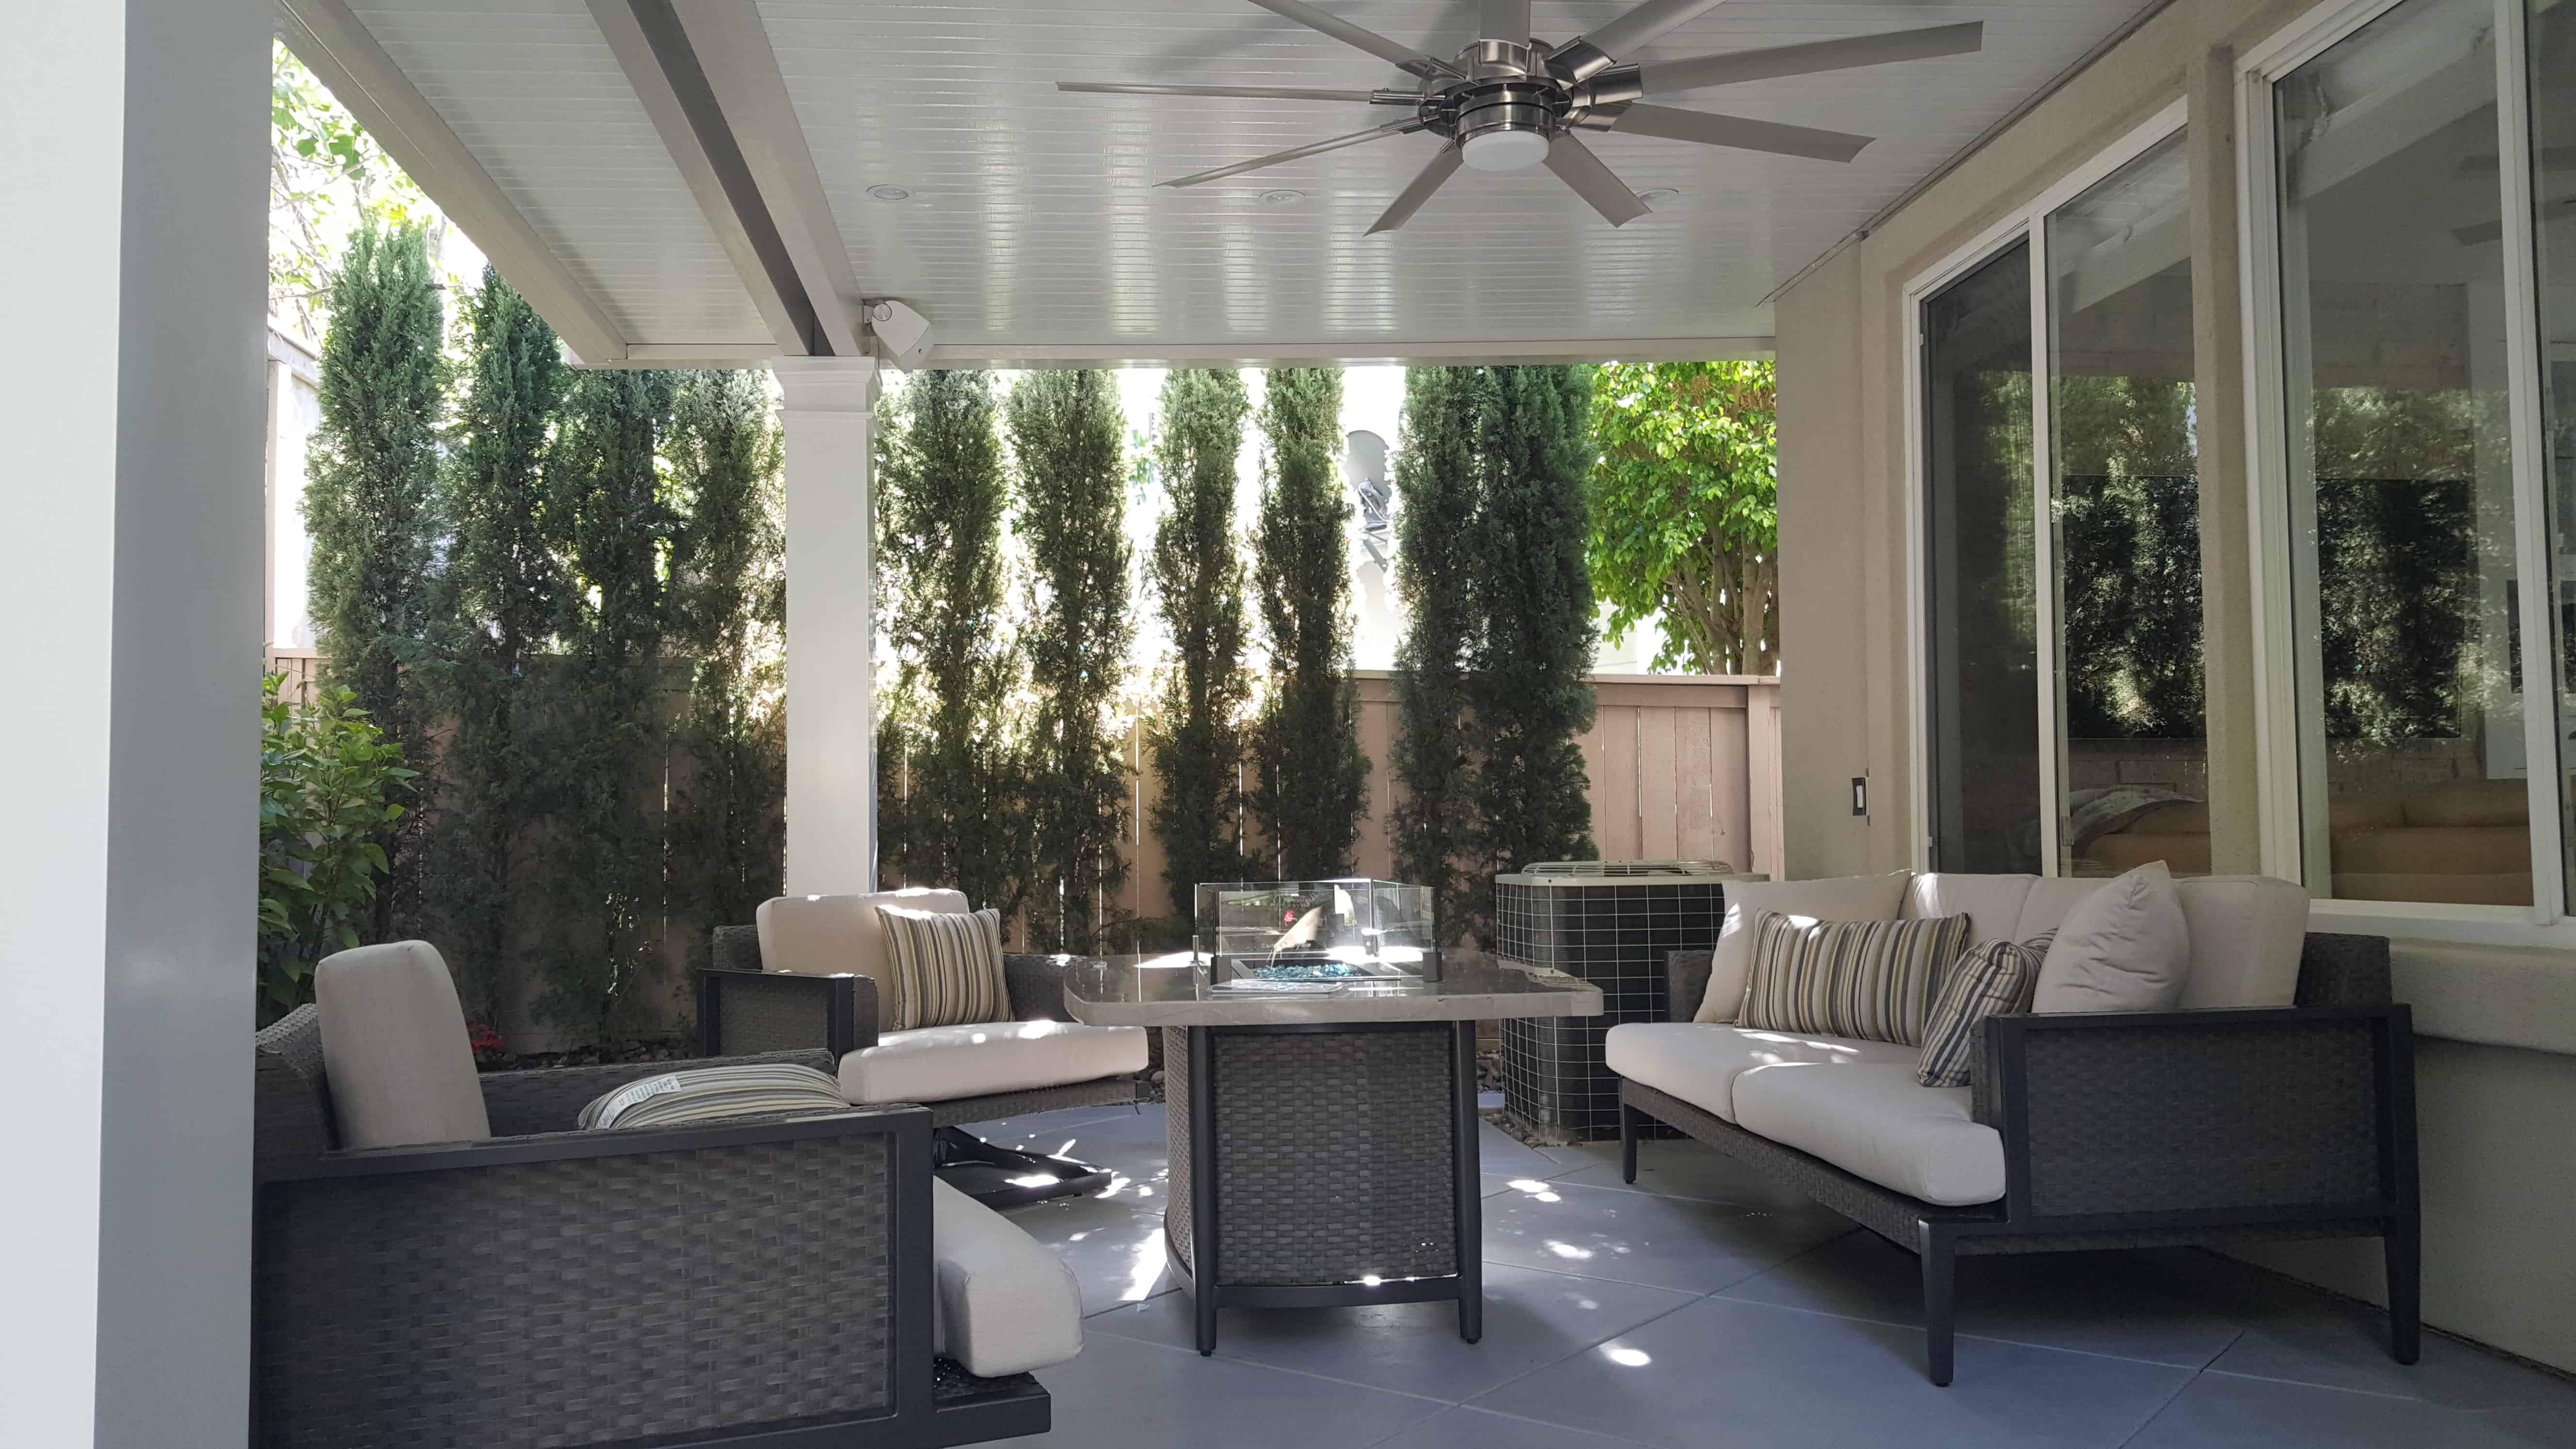 Farm House Patio Cover Designs In Austin Tx Alumawood Factory Direct Covers - Covers Patio Cost Austin Tx